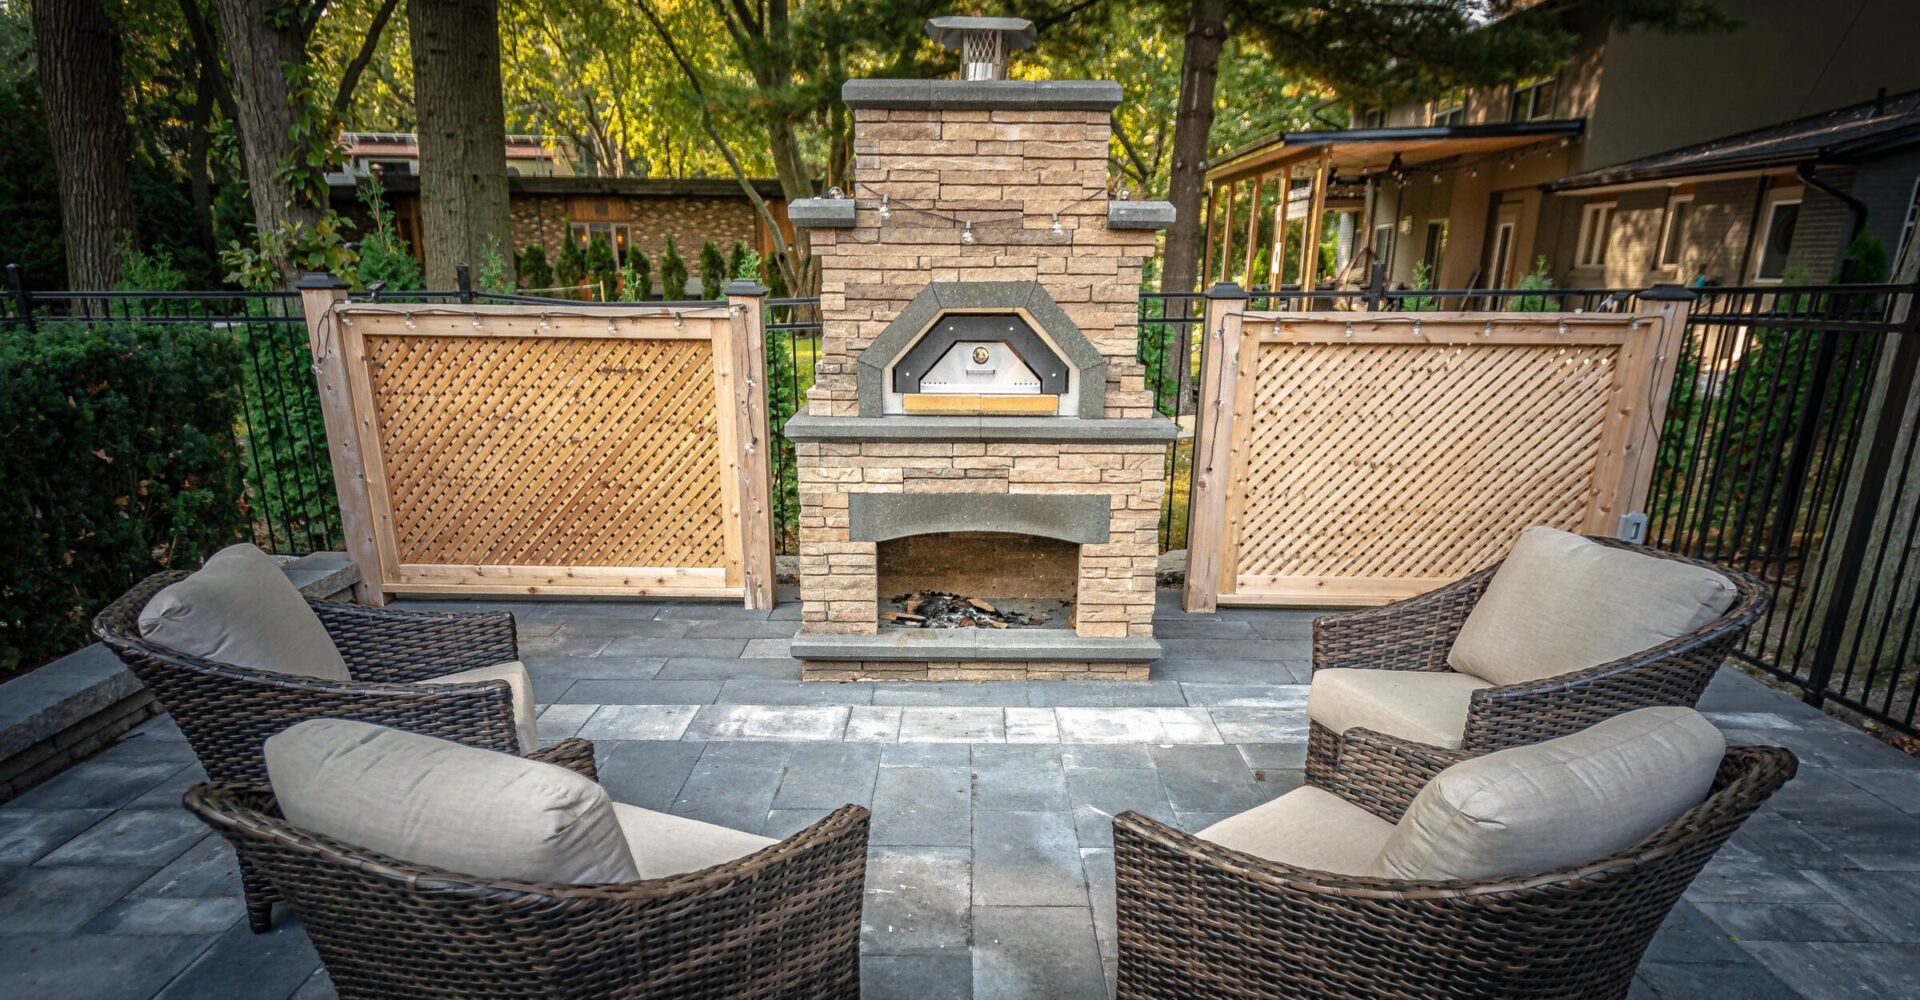 An outdoor patio features a stone pizza oven, wicker chairs with cushions, a wooden lattice privacy screen, and a patterned stone floor surrounded by trees.